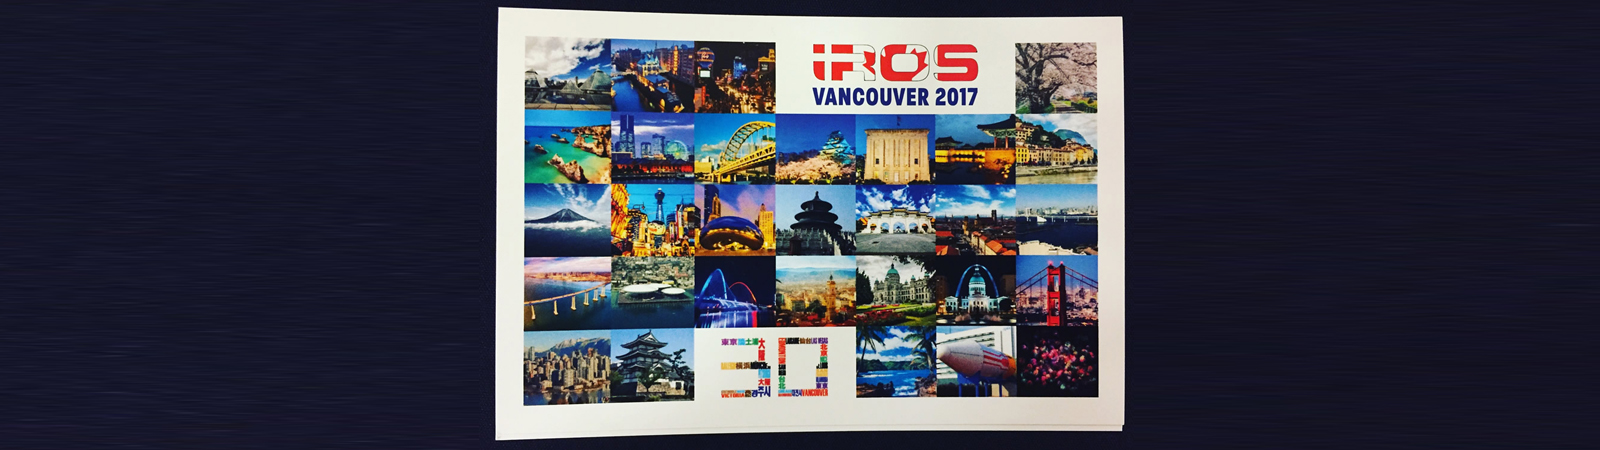 Thank You for Your Contributions to IROS 2017!